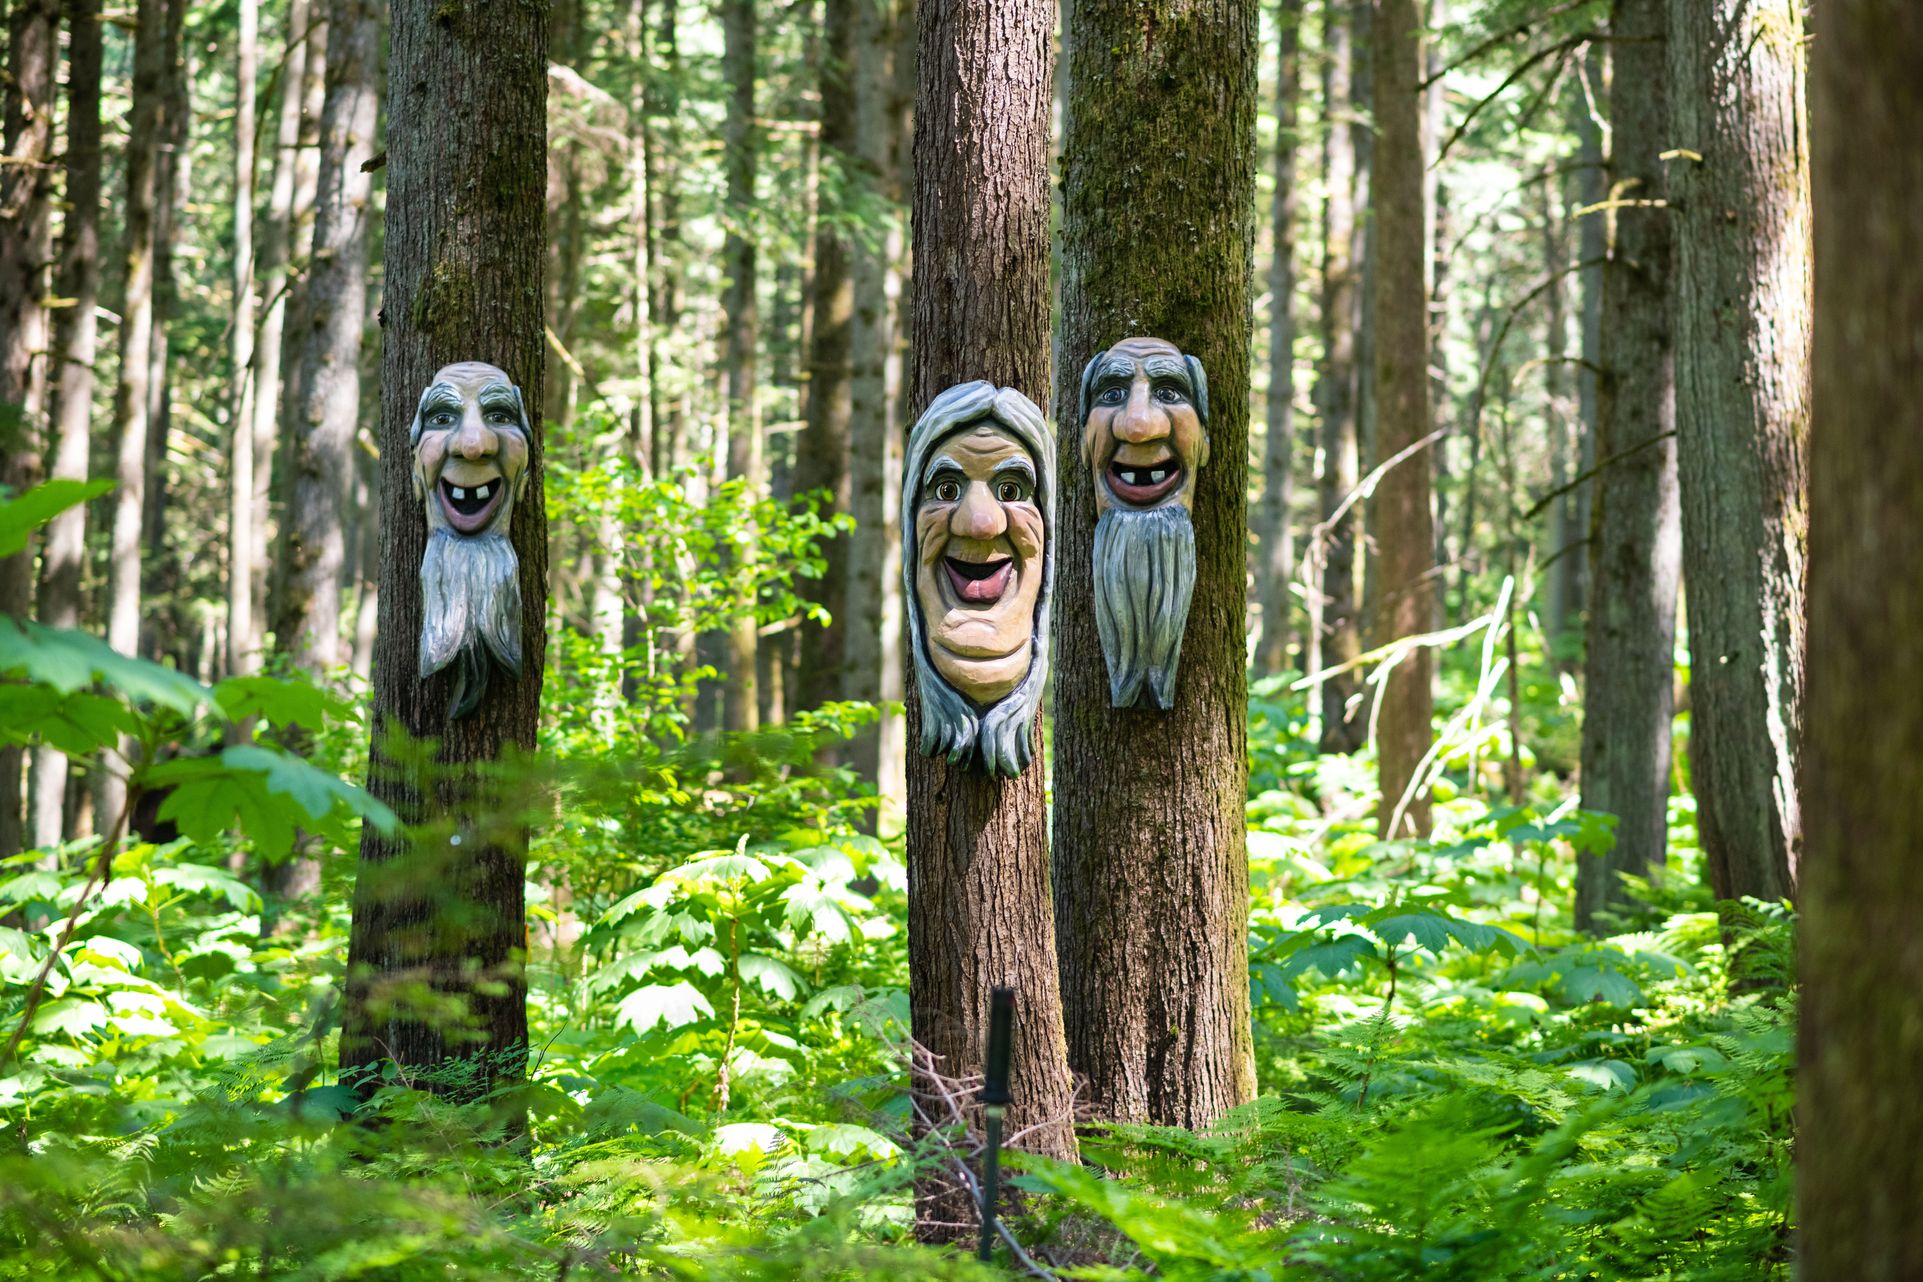 https://enchantedforestbc.com/wp-content/uploads/2022/03/the-enchanted-forest-carved-forest-creatures-bc-attraction-1.jpg